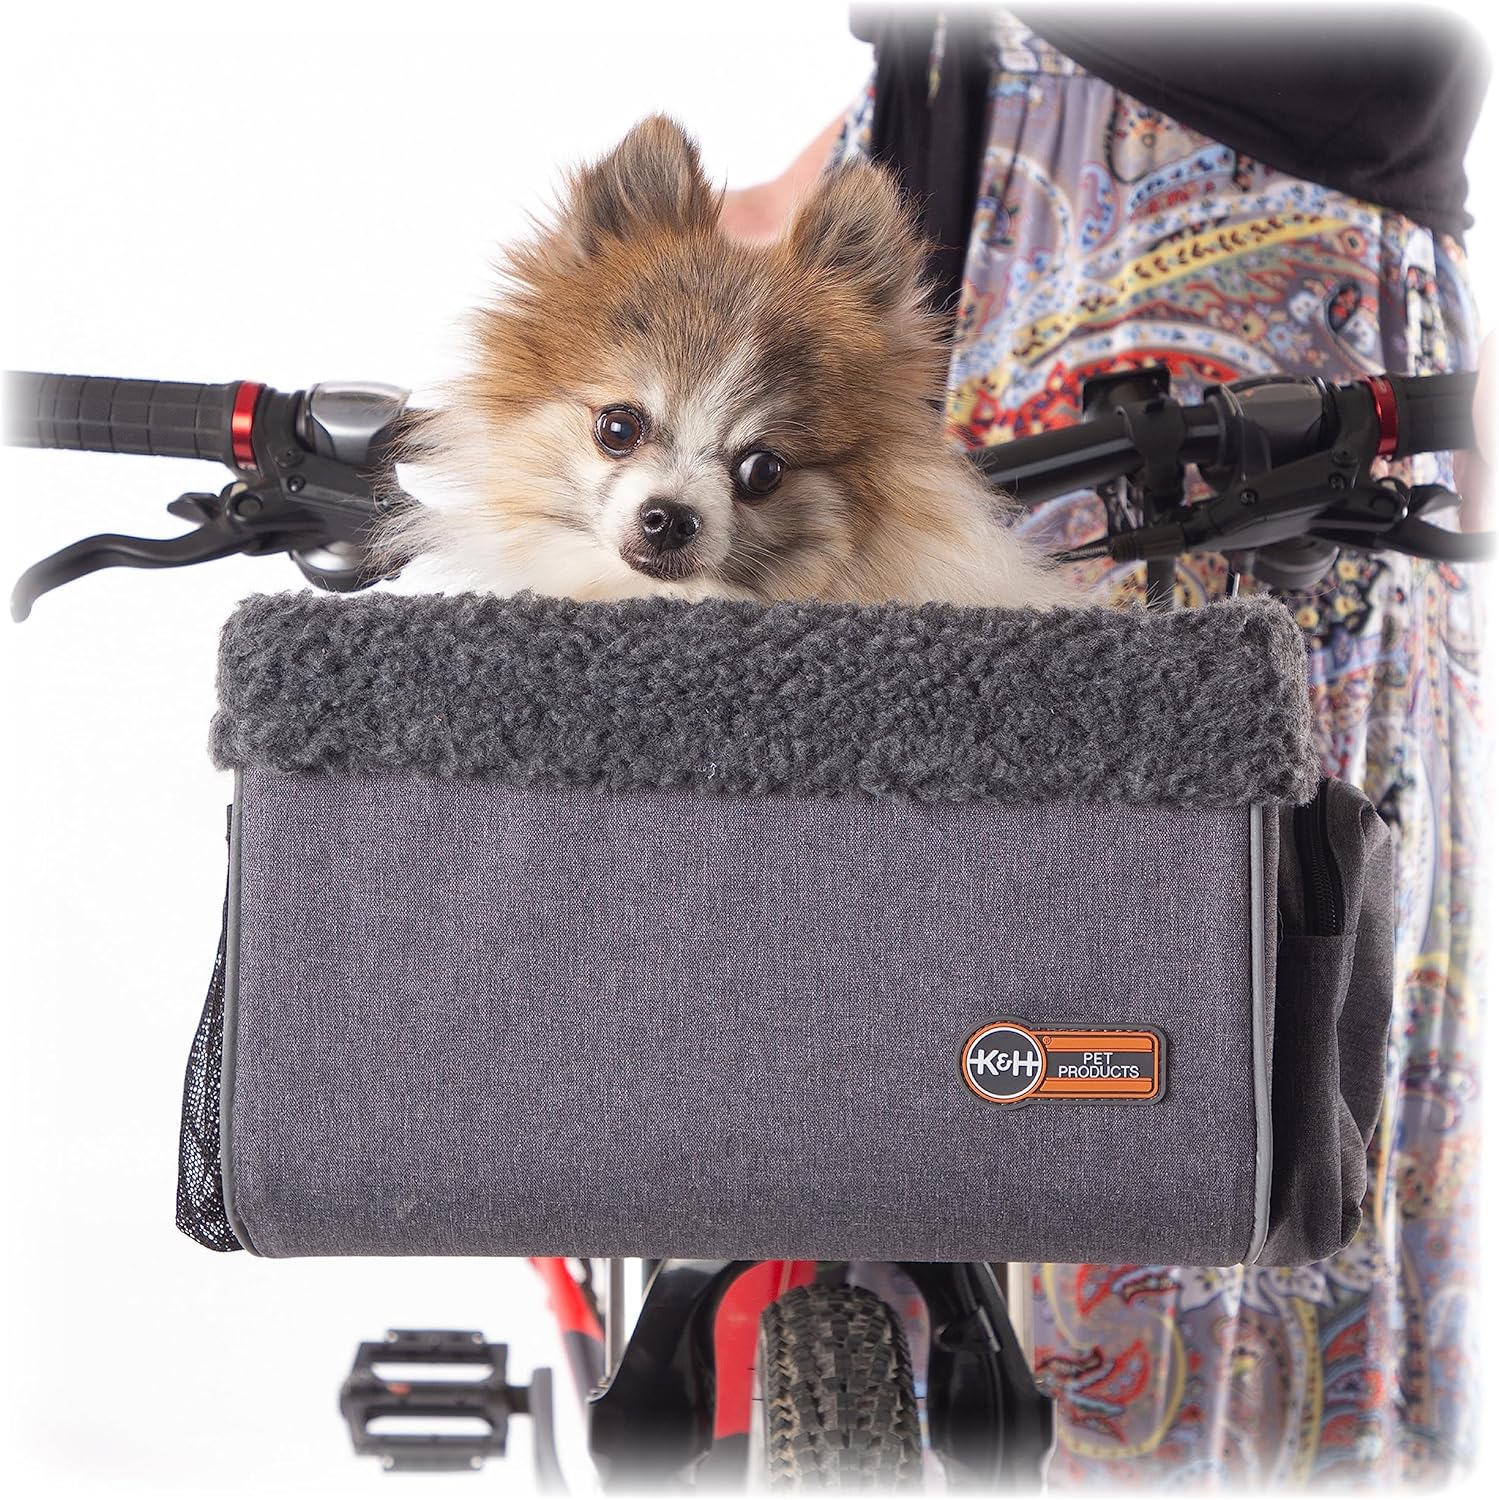 K&H Pet Products Universal Bike Pet Carrier for Travel, Cat and Dog Bicycle Baskets, Classy Gray Small 9 X 12.5 X 8 Inches